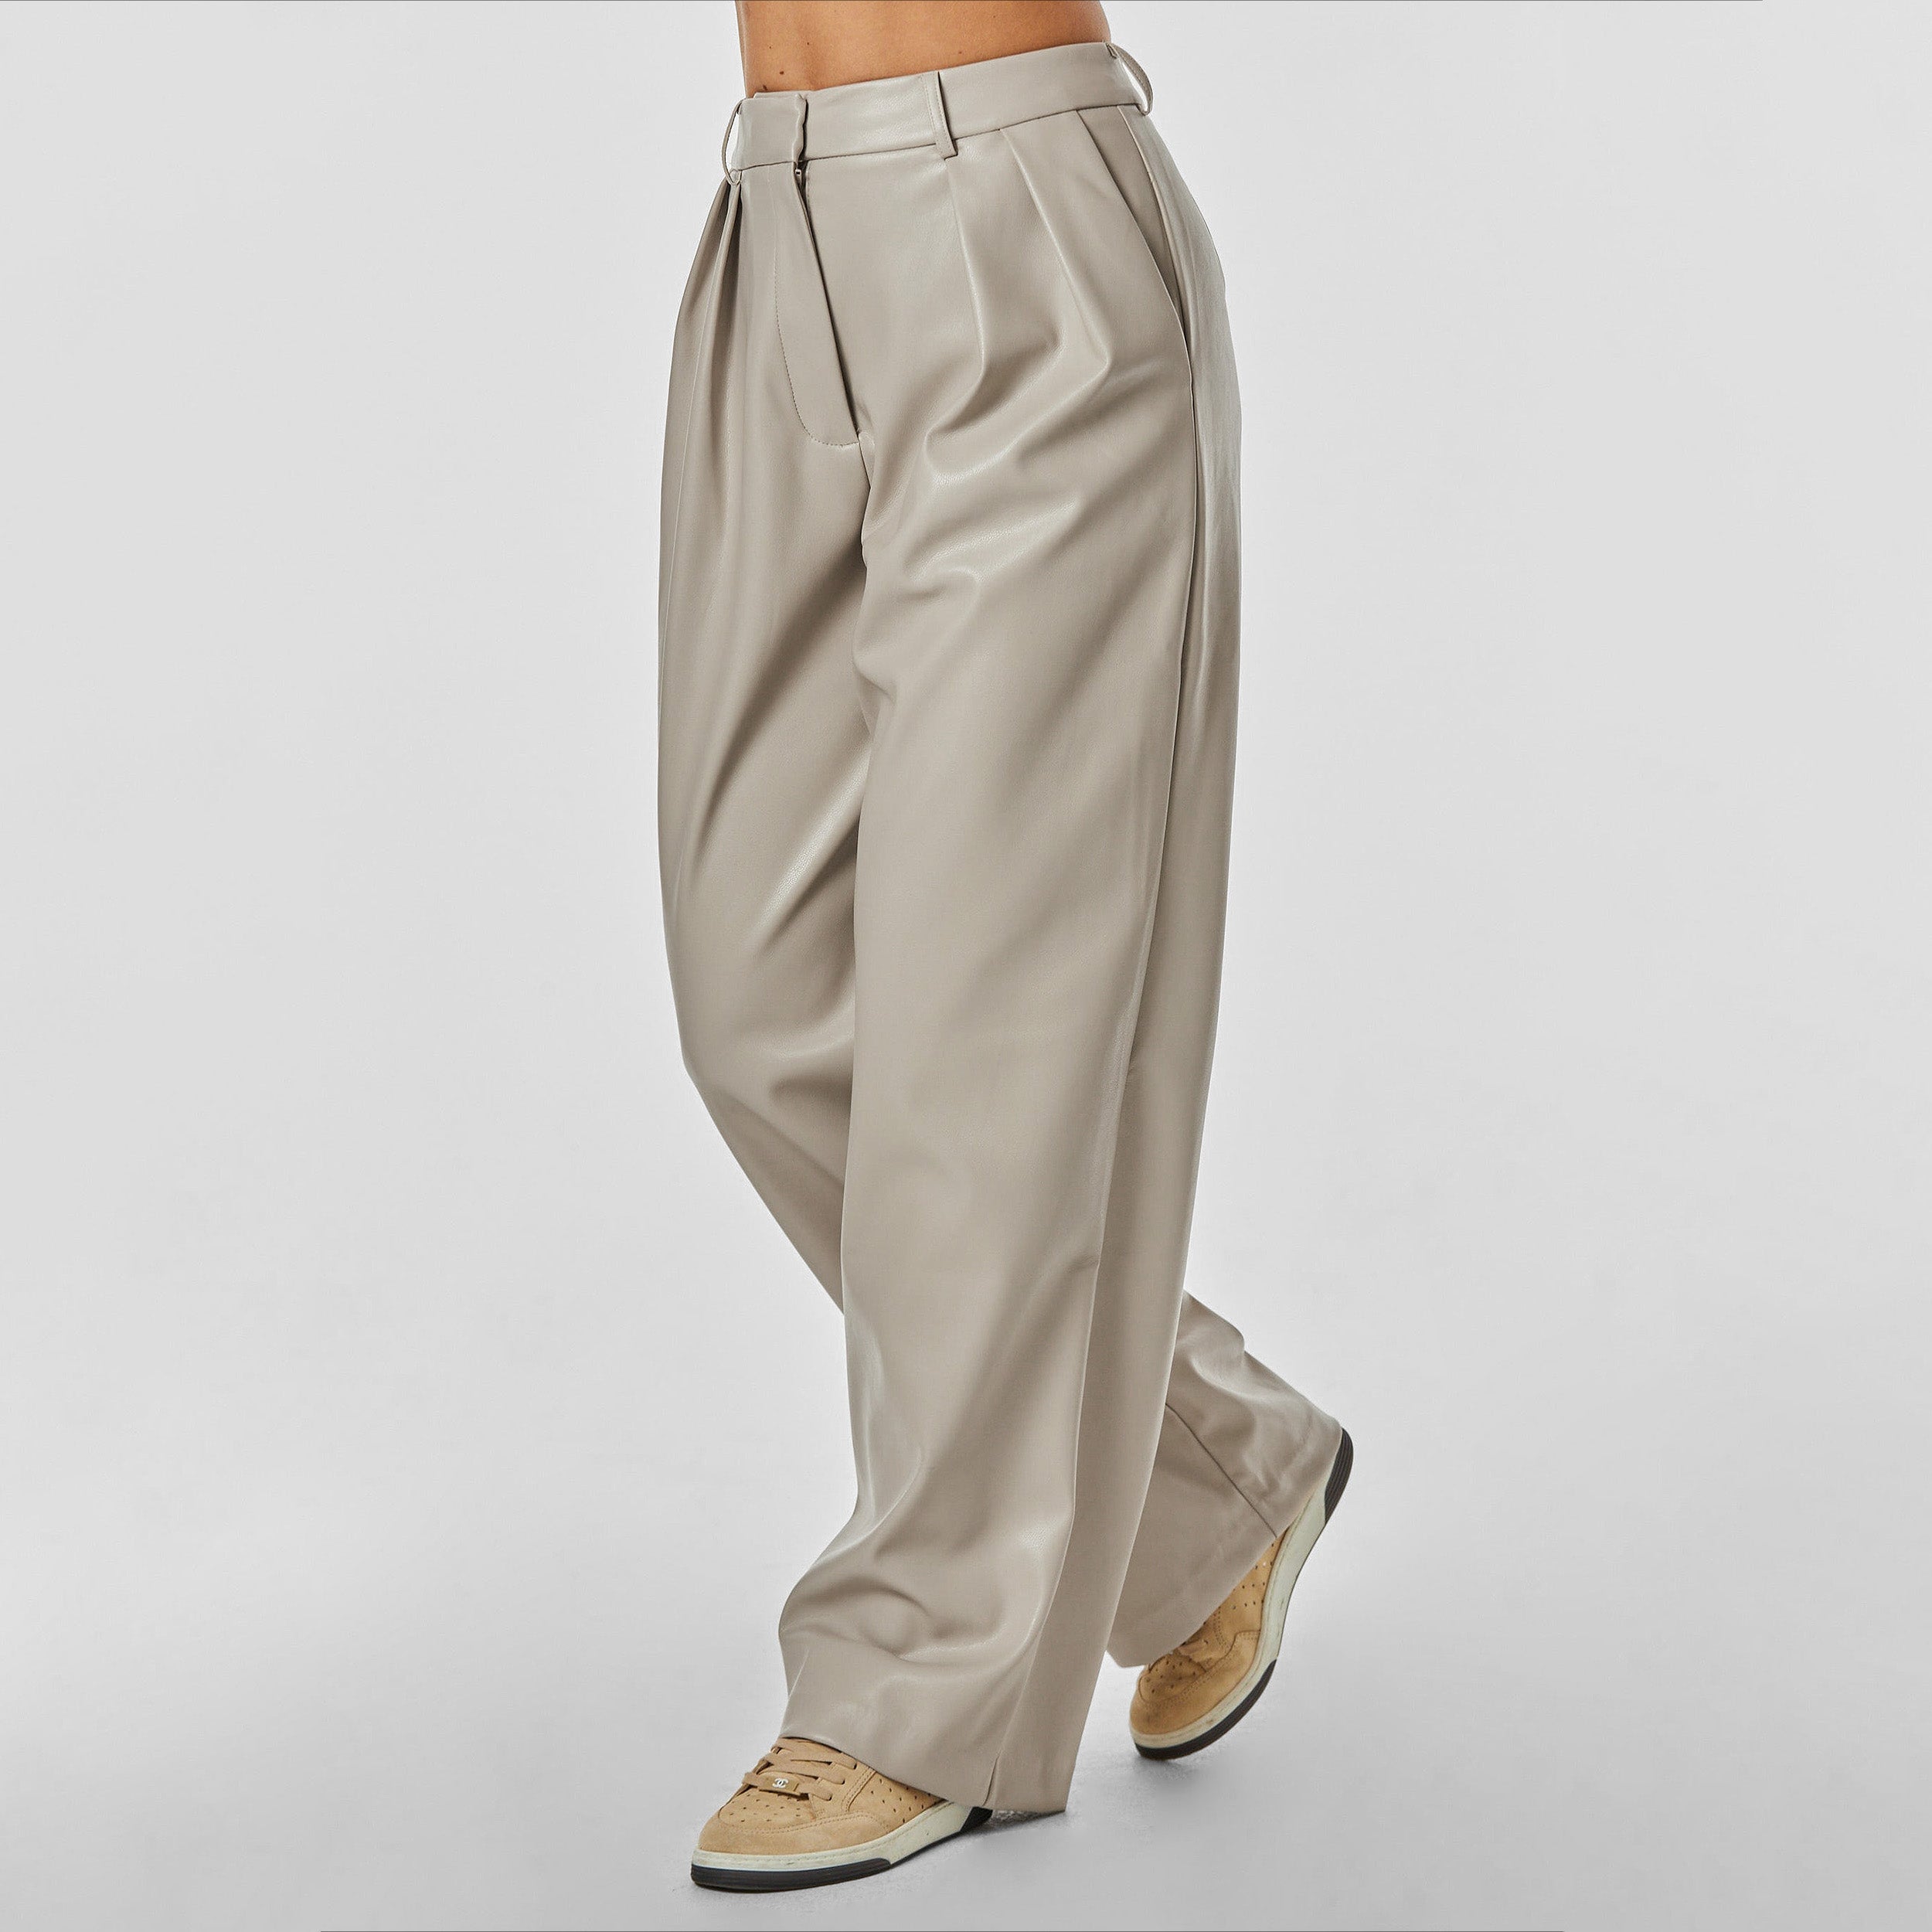 3/4 front view of woman wearing beige colored high rise vegan leather pleated trousers.